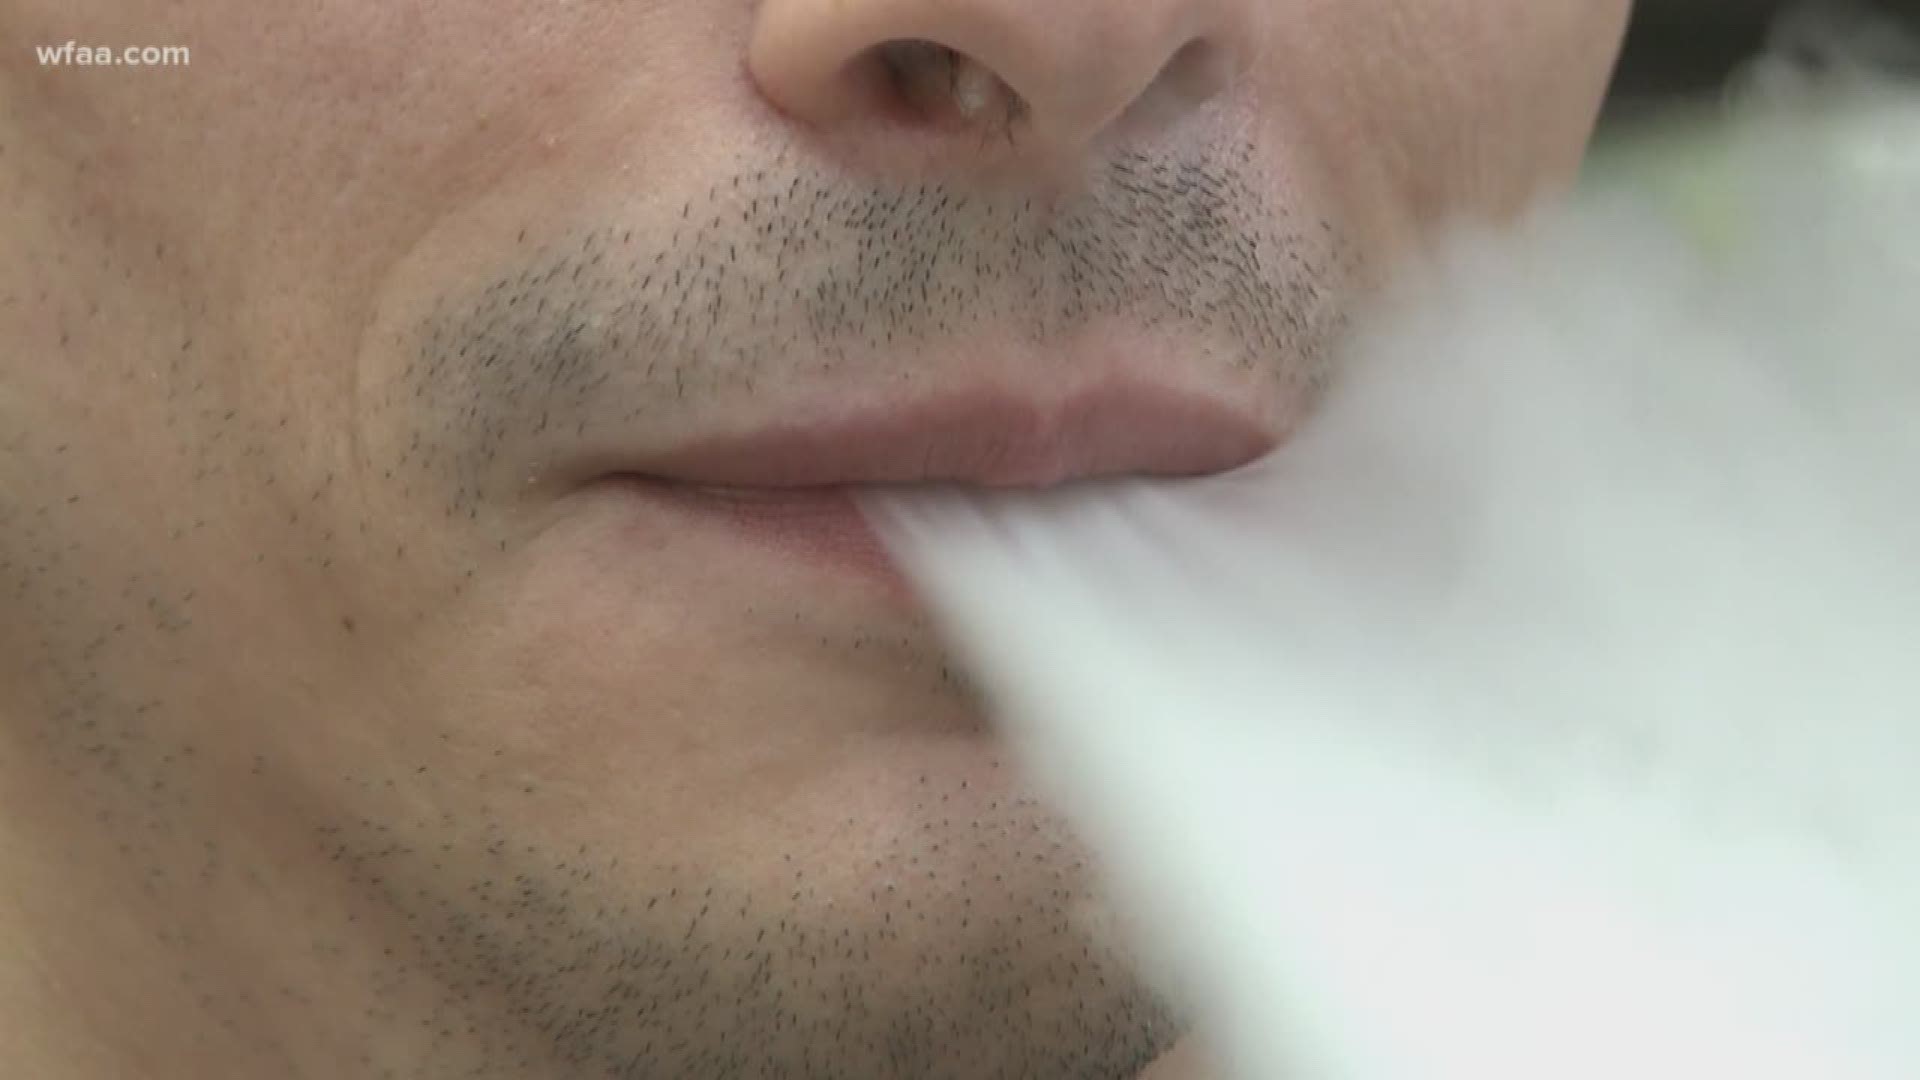 Doctors are urging the public to stop vaping. One doctor in North Texas suggests if you've been vaping a long time you should get a lung scan. "Without lung health, you have no life," said Dr. Duncan.